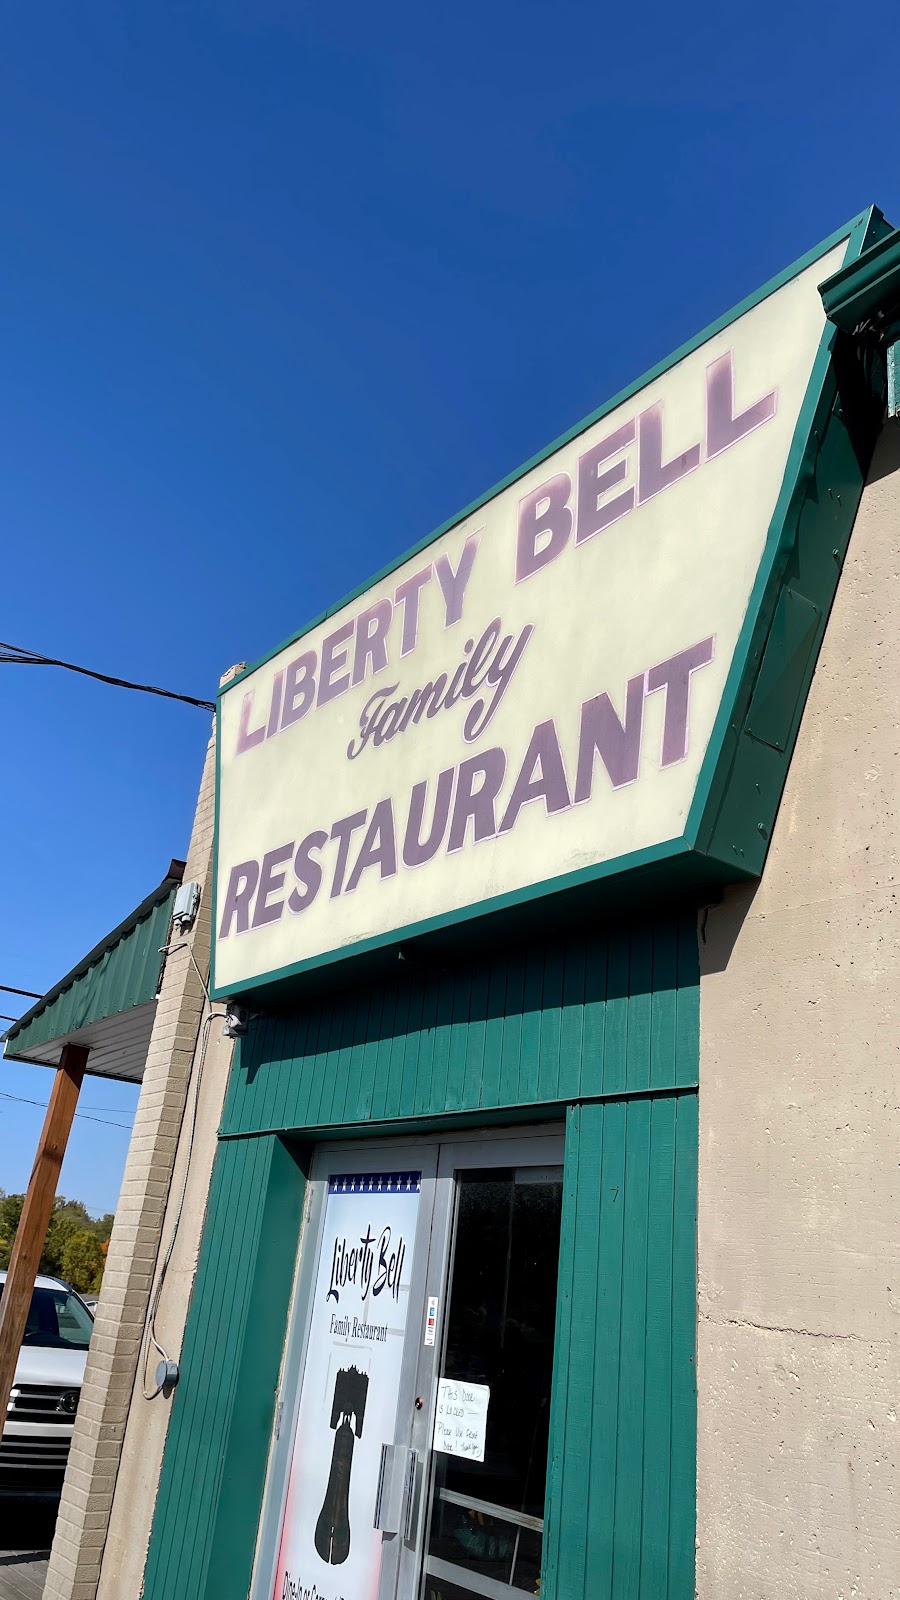 Liberty Bell Restaurant | 215 S Main St, Liberty, IN 47353 | Phone: (765) 458-6115